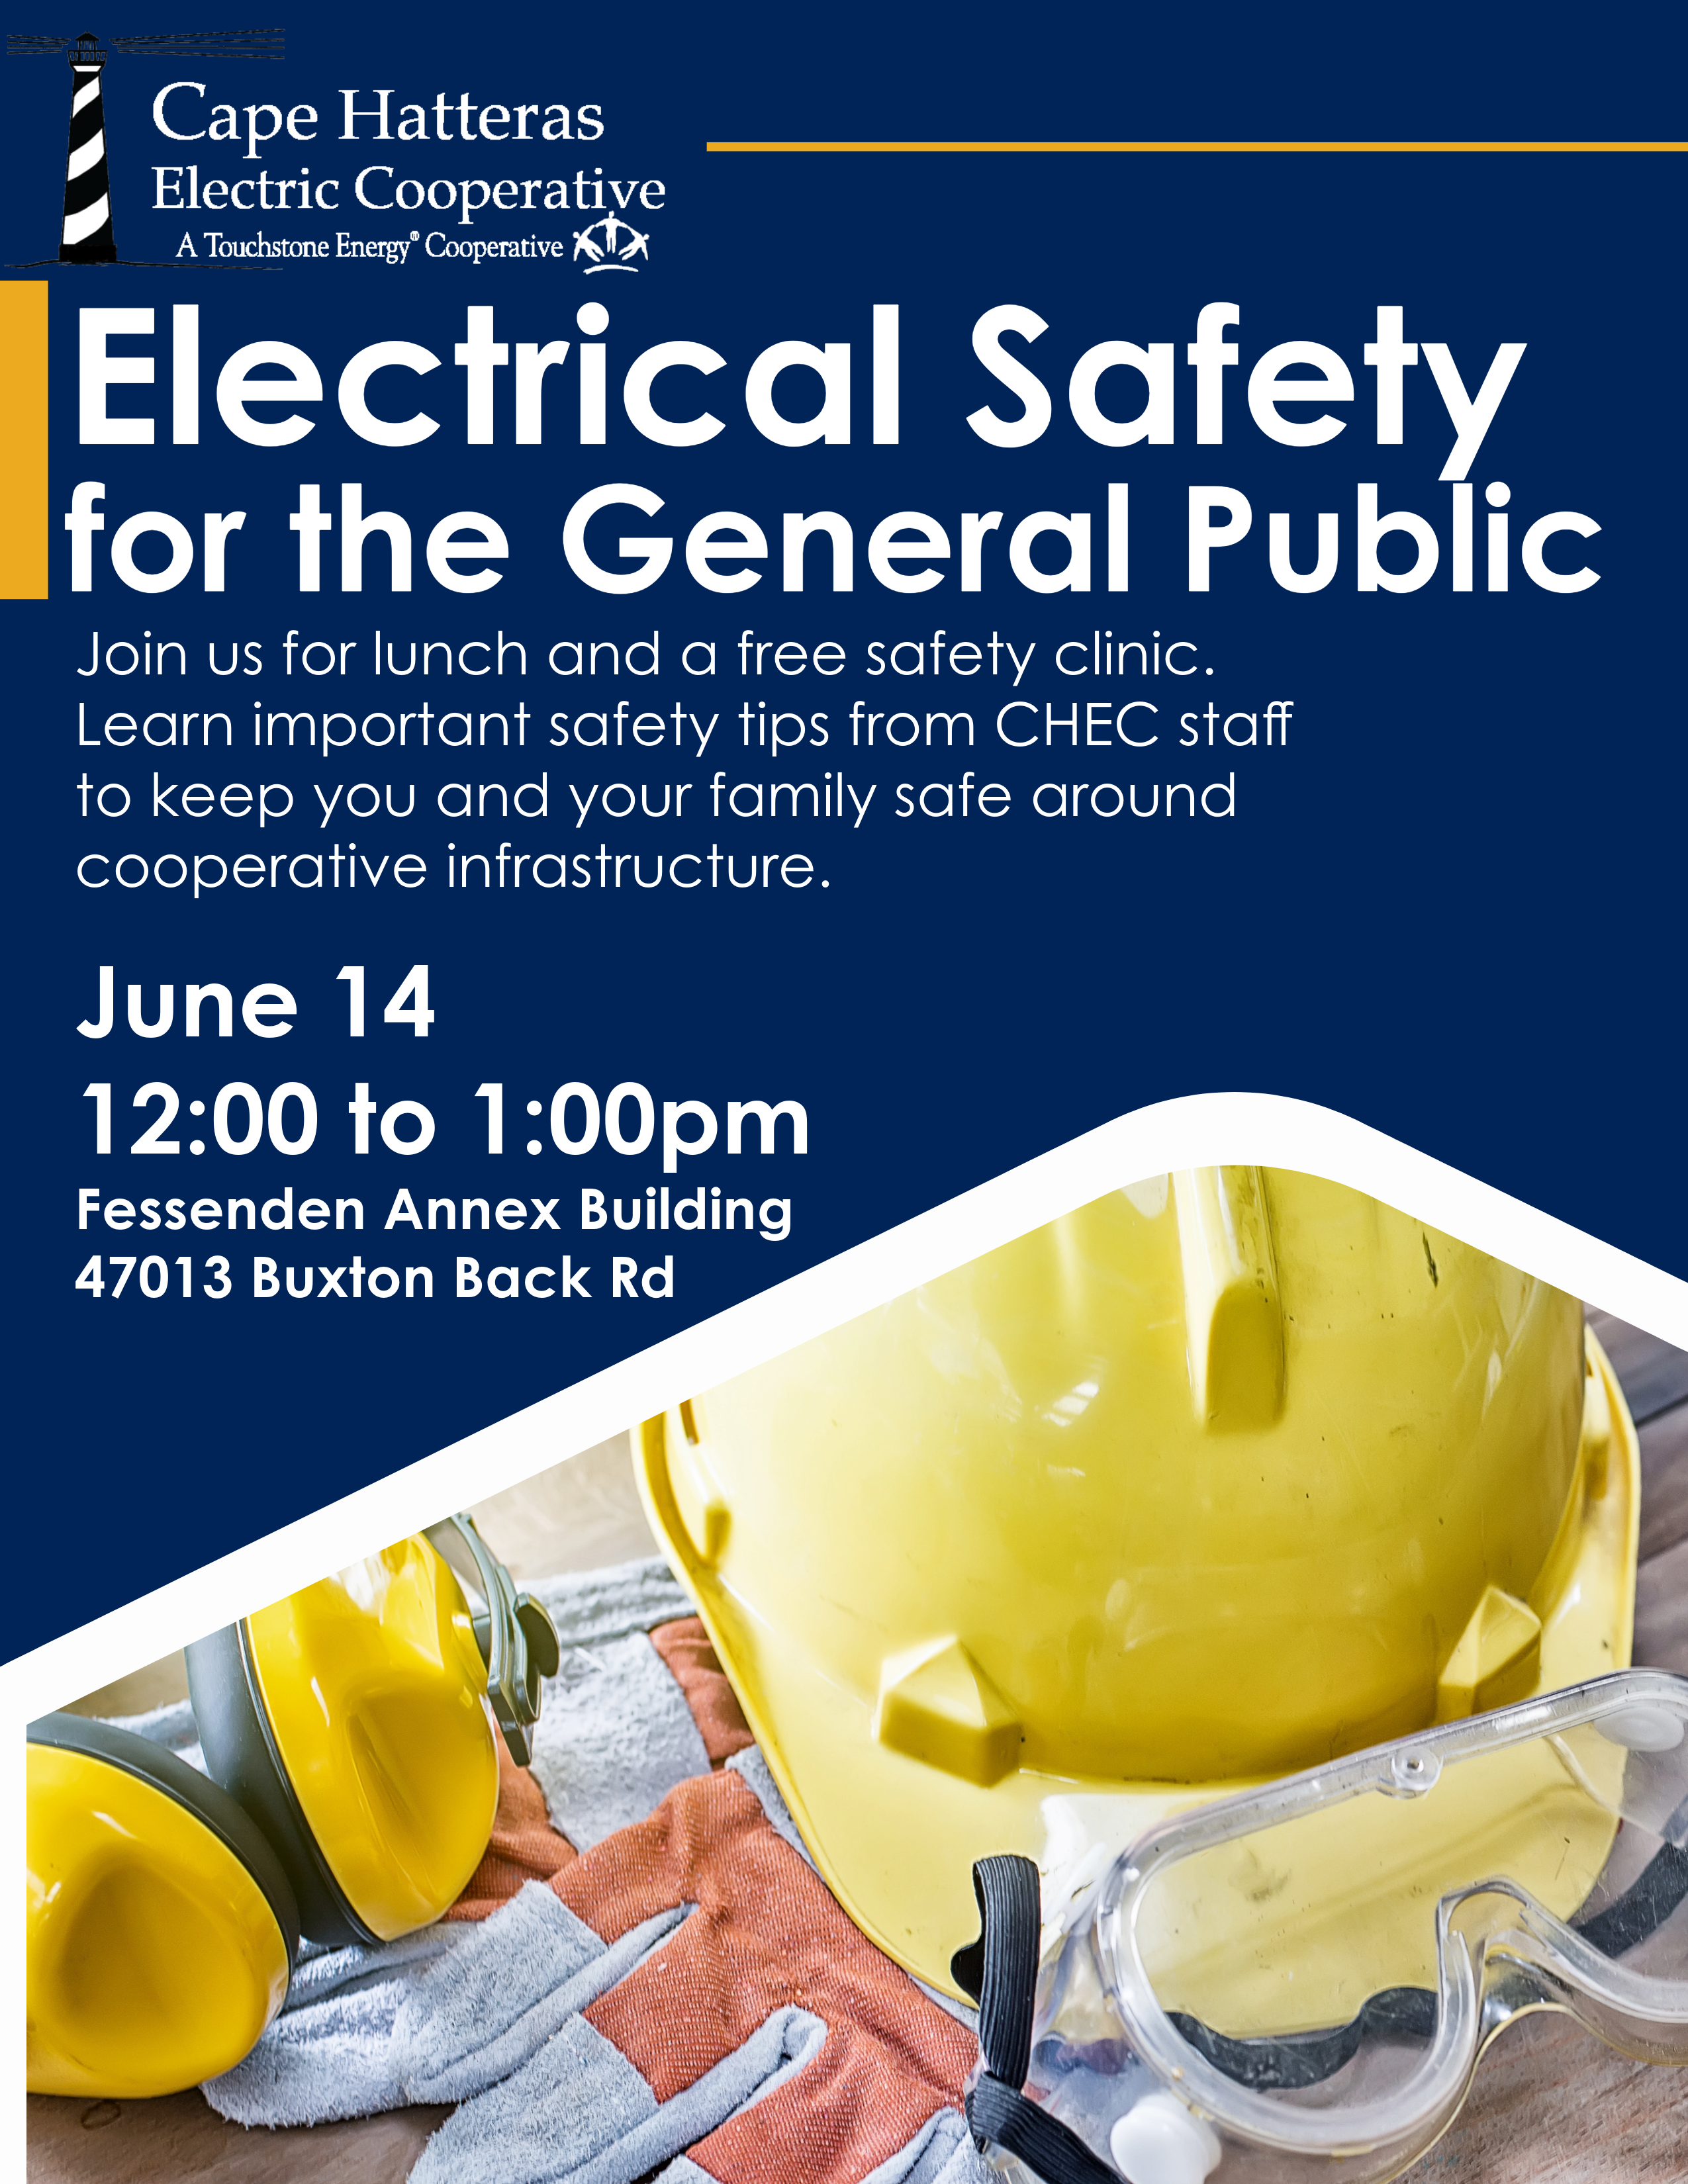 Electrical Safety for the general public Flyer. Event is happening June 14 at noon and the Fessenden Annex Building in Buxton. Call 252-995-5616 of more details